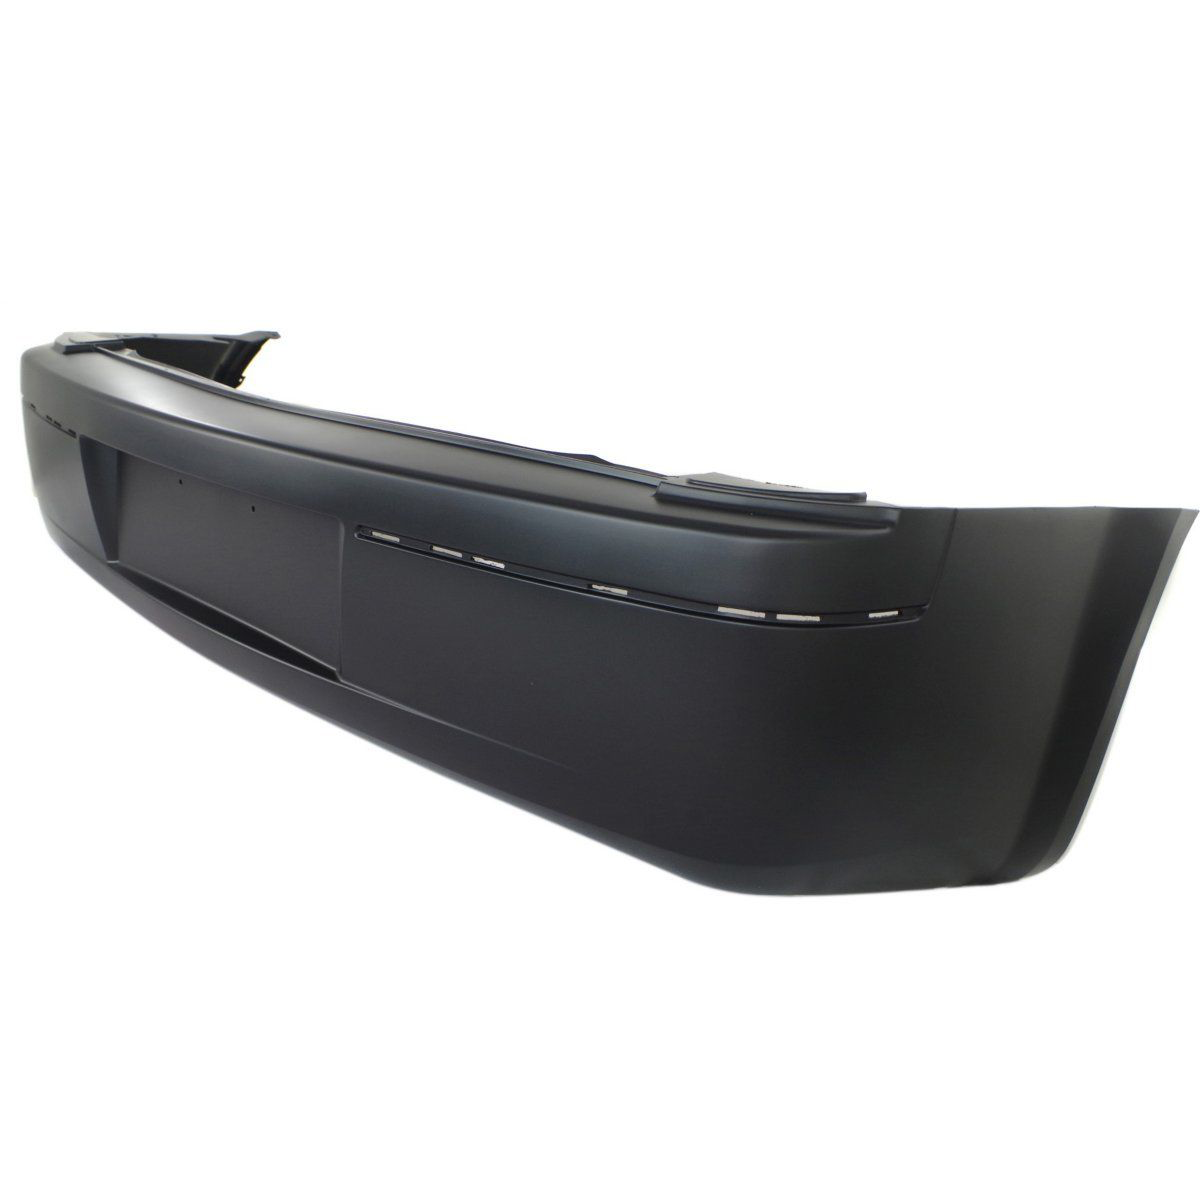 2004-2010 CHRYSLER 300 Rear Bumper Cover w/3.5L engine Painted to Match